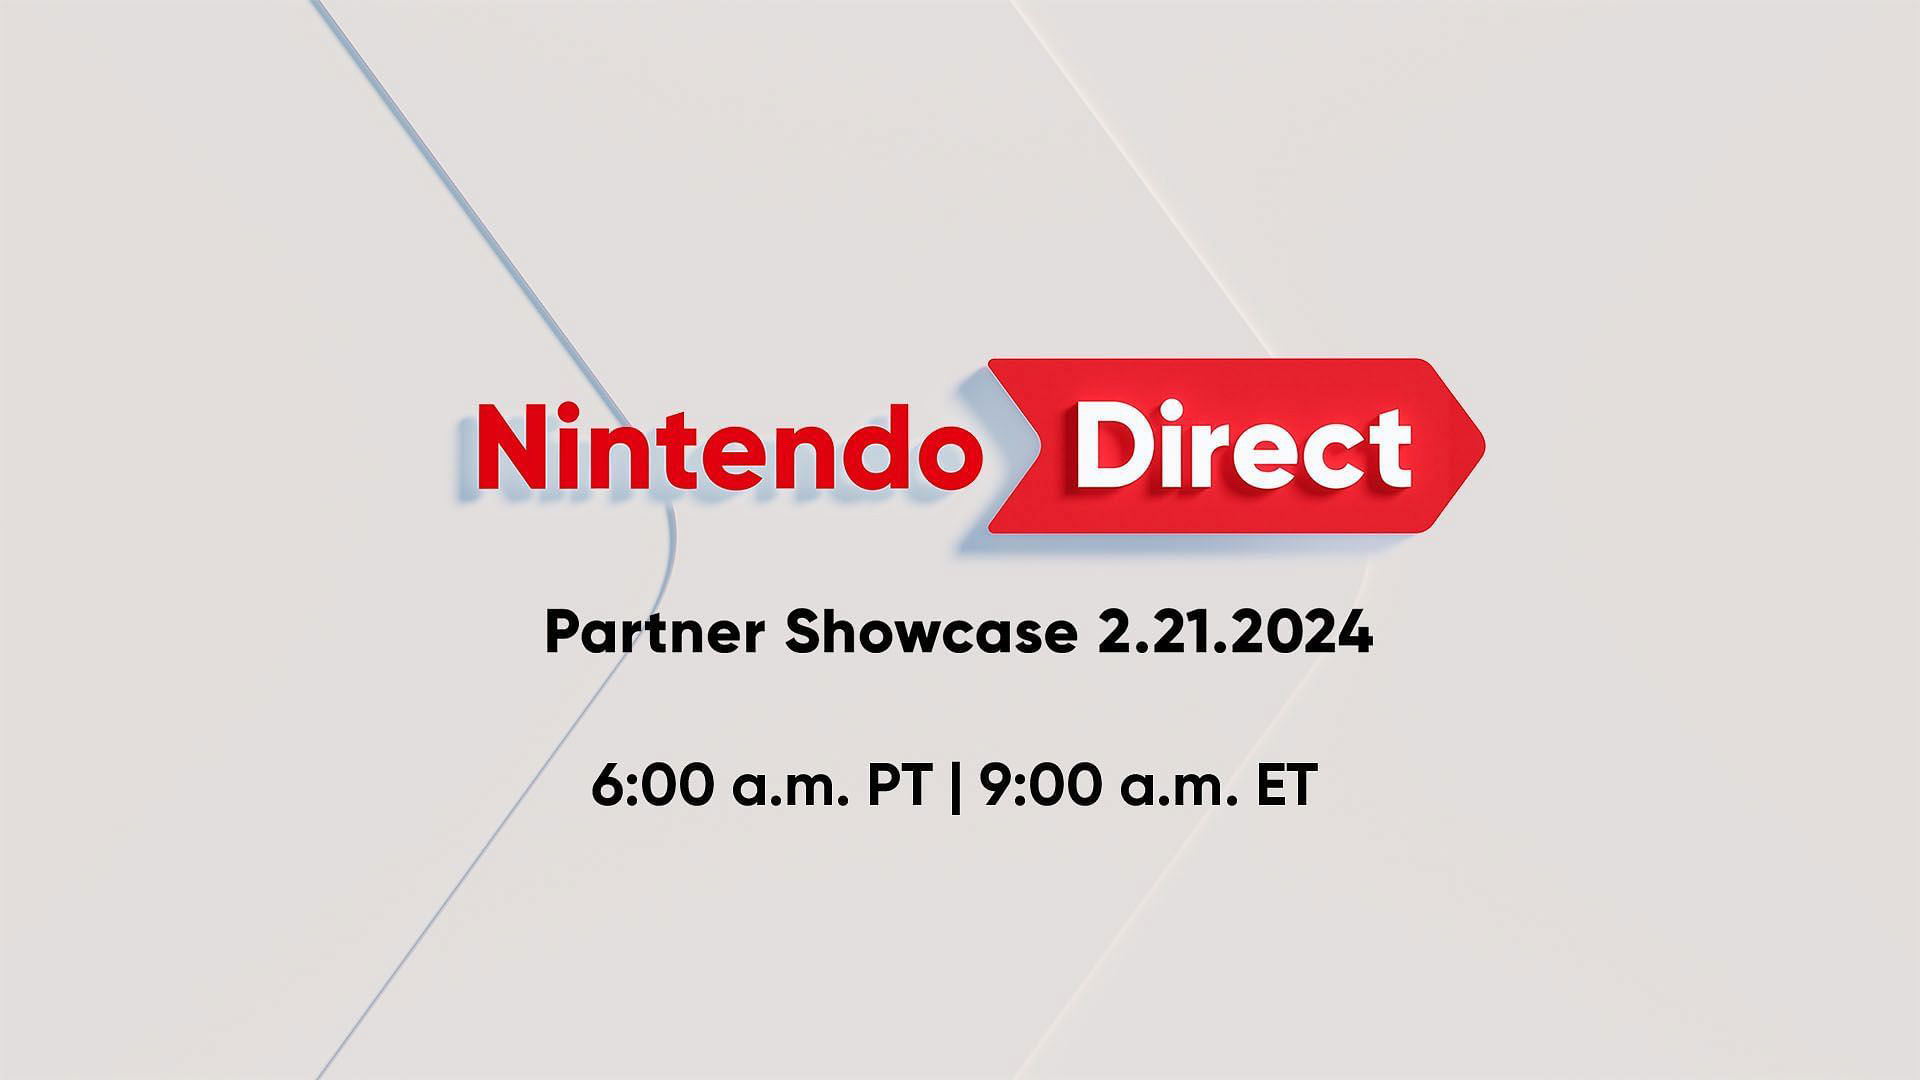 Nintendo Direct Partner Showcase February 2024 Date and time, expected